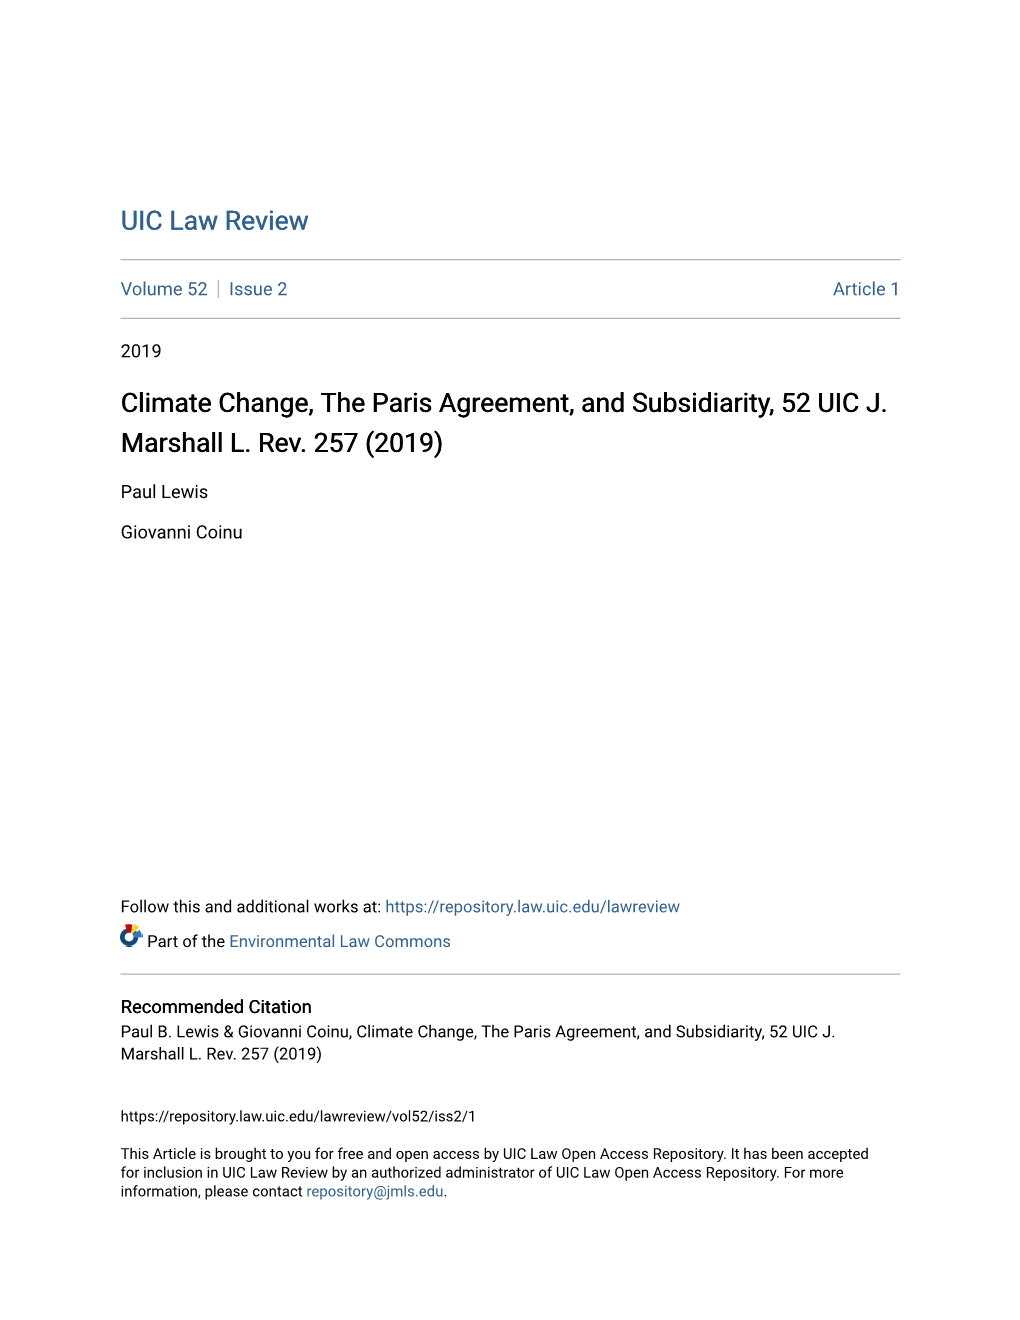 Climate Change, the Paris Agreement, and Subsidiarity, 52 UIC J